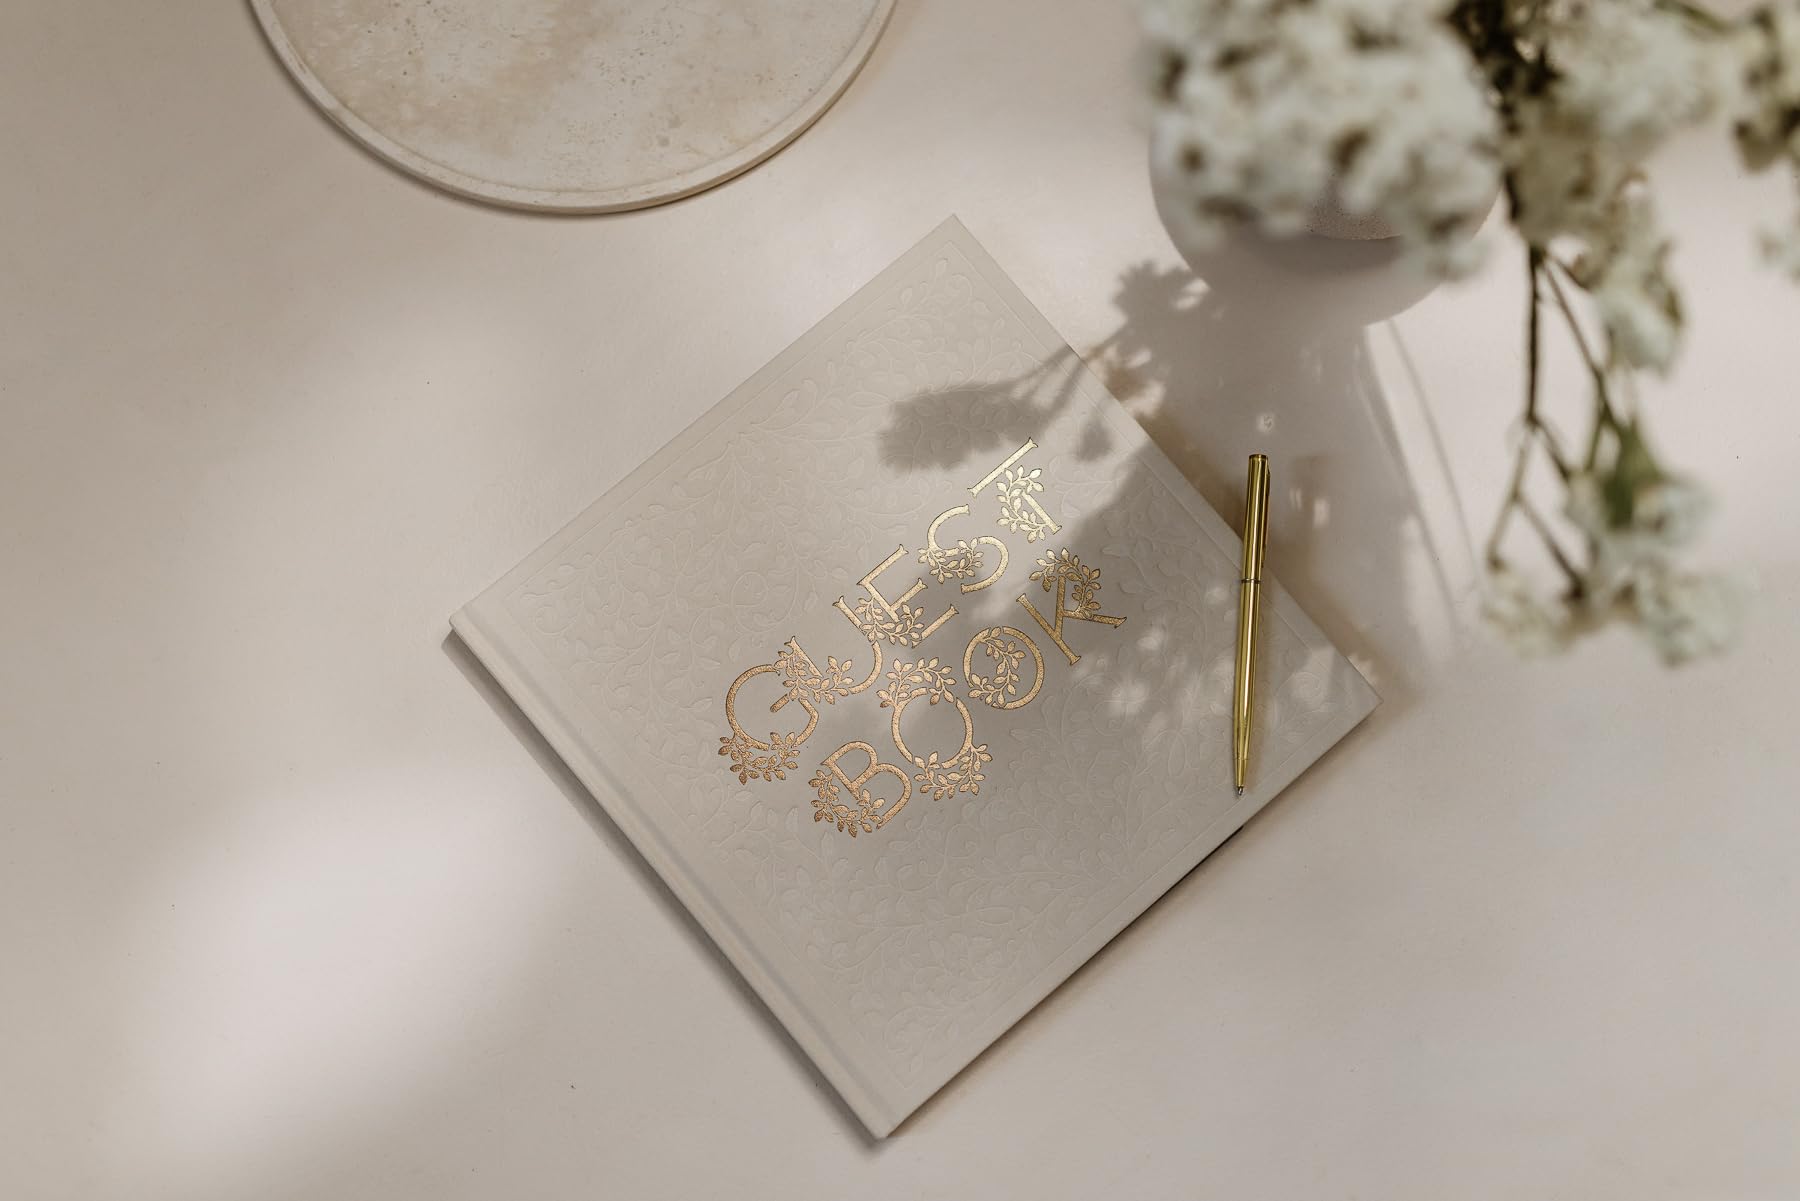 Wedding Guest Book: An Heirloom-Quality Guest Book with Foil Accents and Hand-Drawn Illustrations